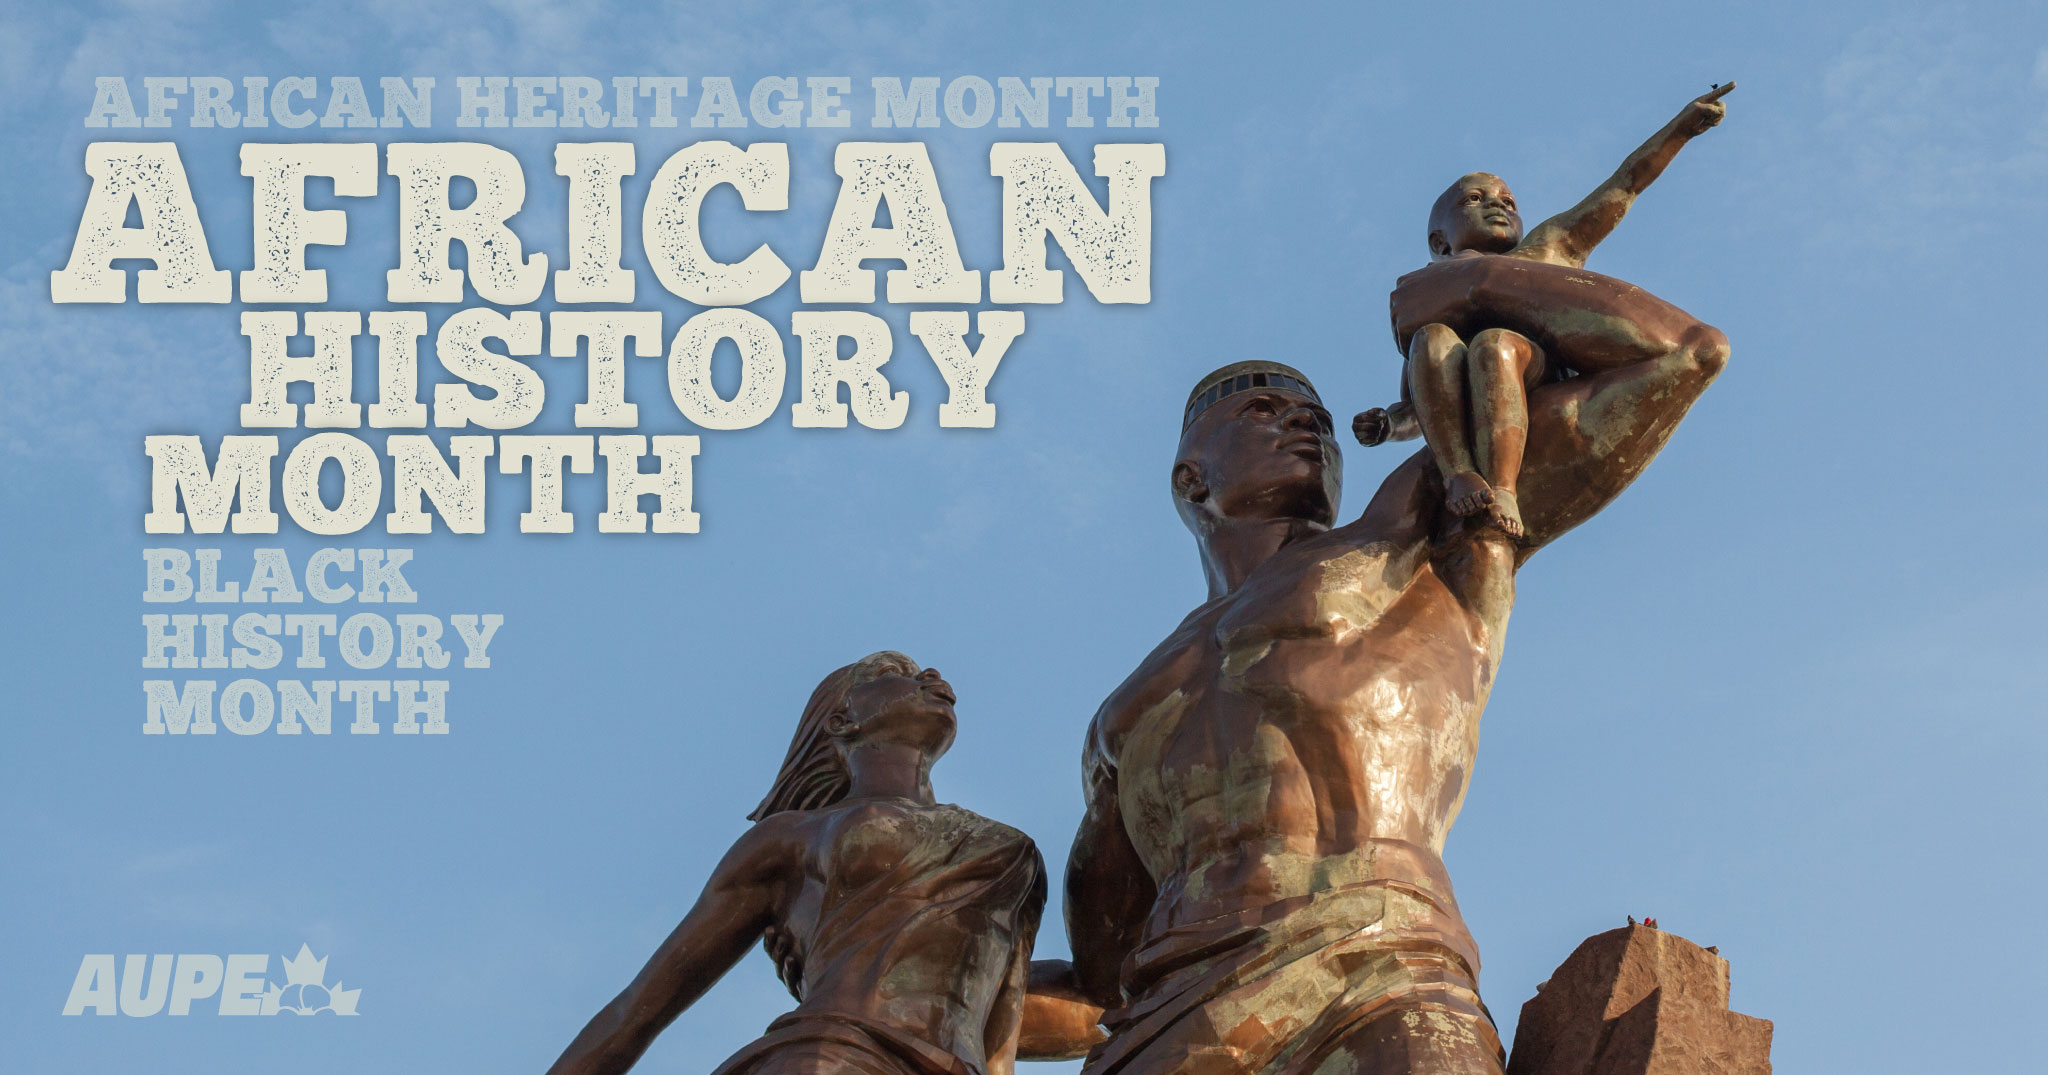 African Heritage Month, Black History Month, or African History Month?